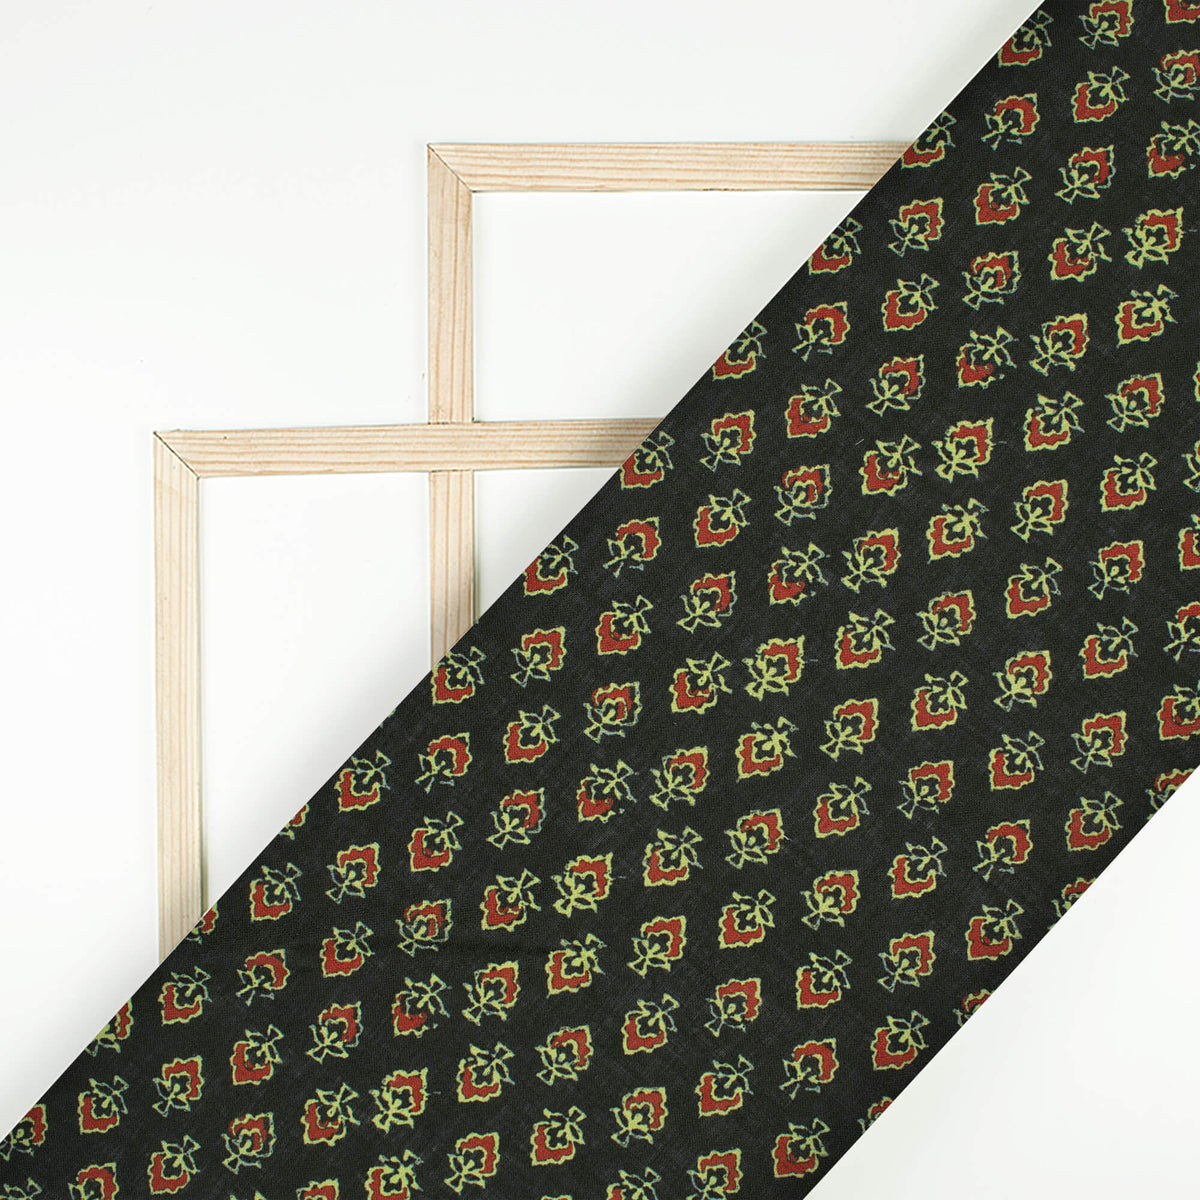 Dark Green And Red Ajrakh Pattern Digital Print Linen Textured Fabric (Width 56 Inches)